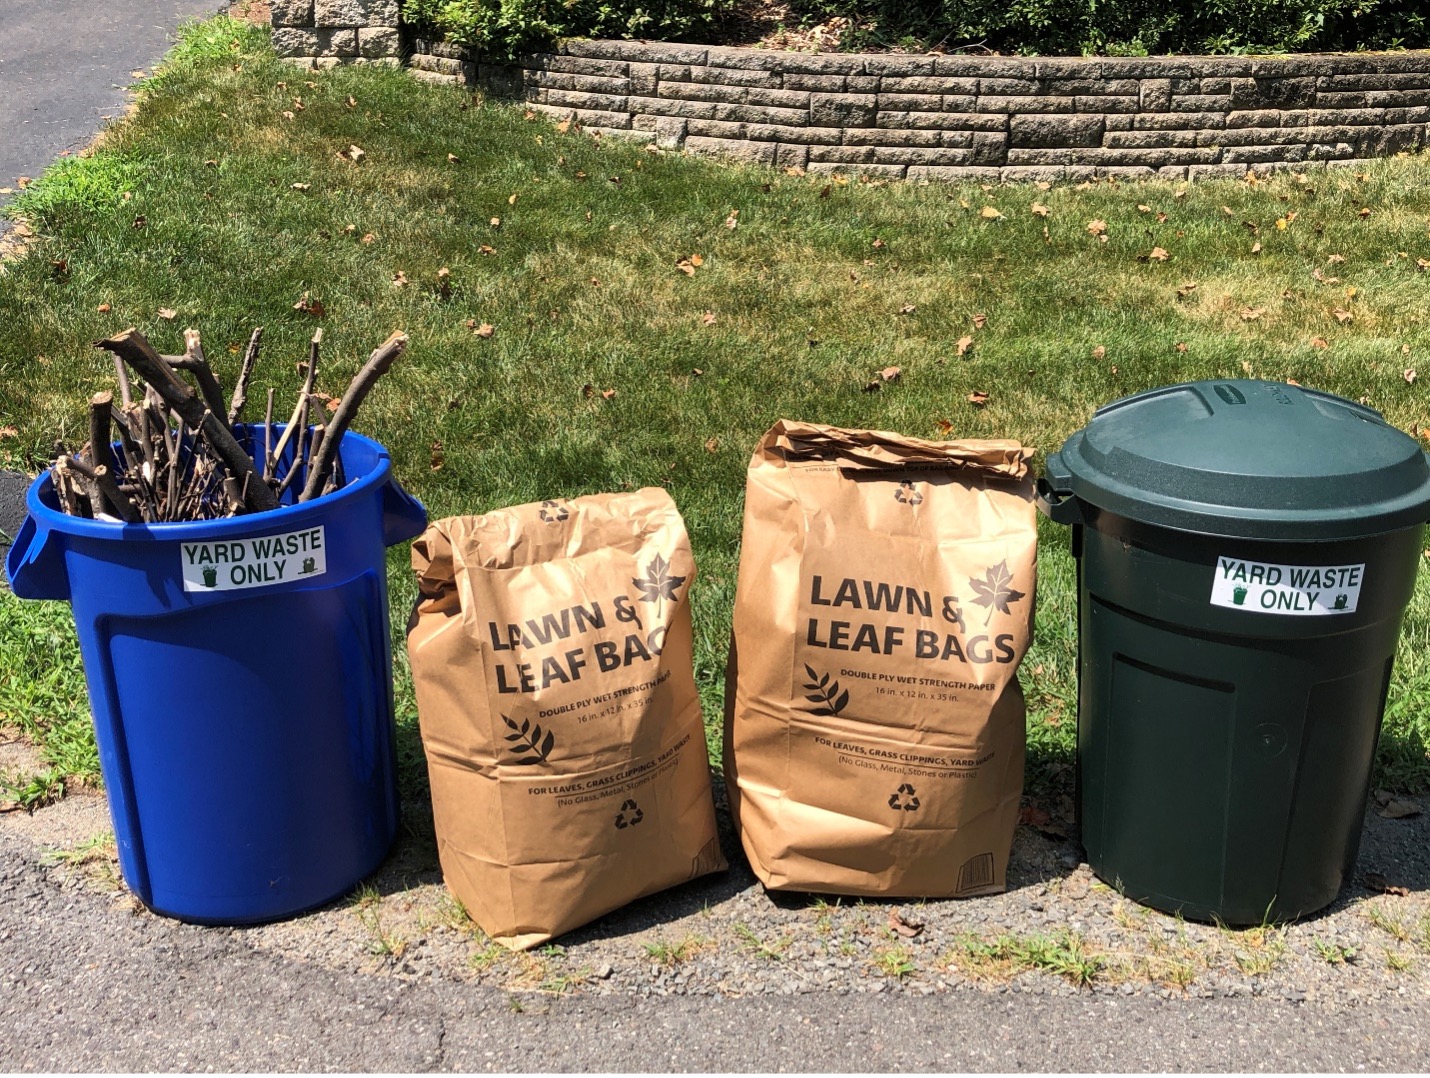 Use clear bags for leaves or grass clippings